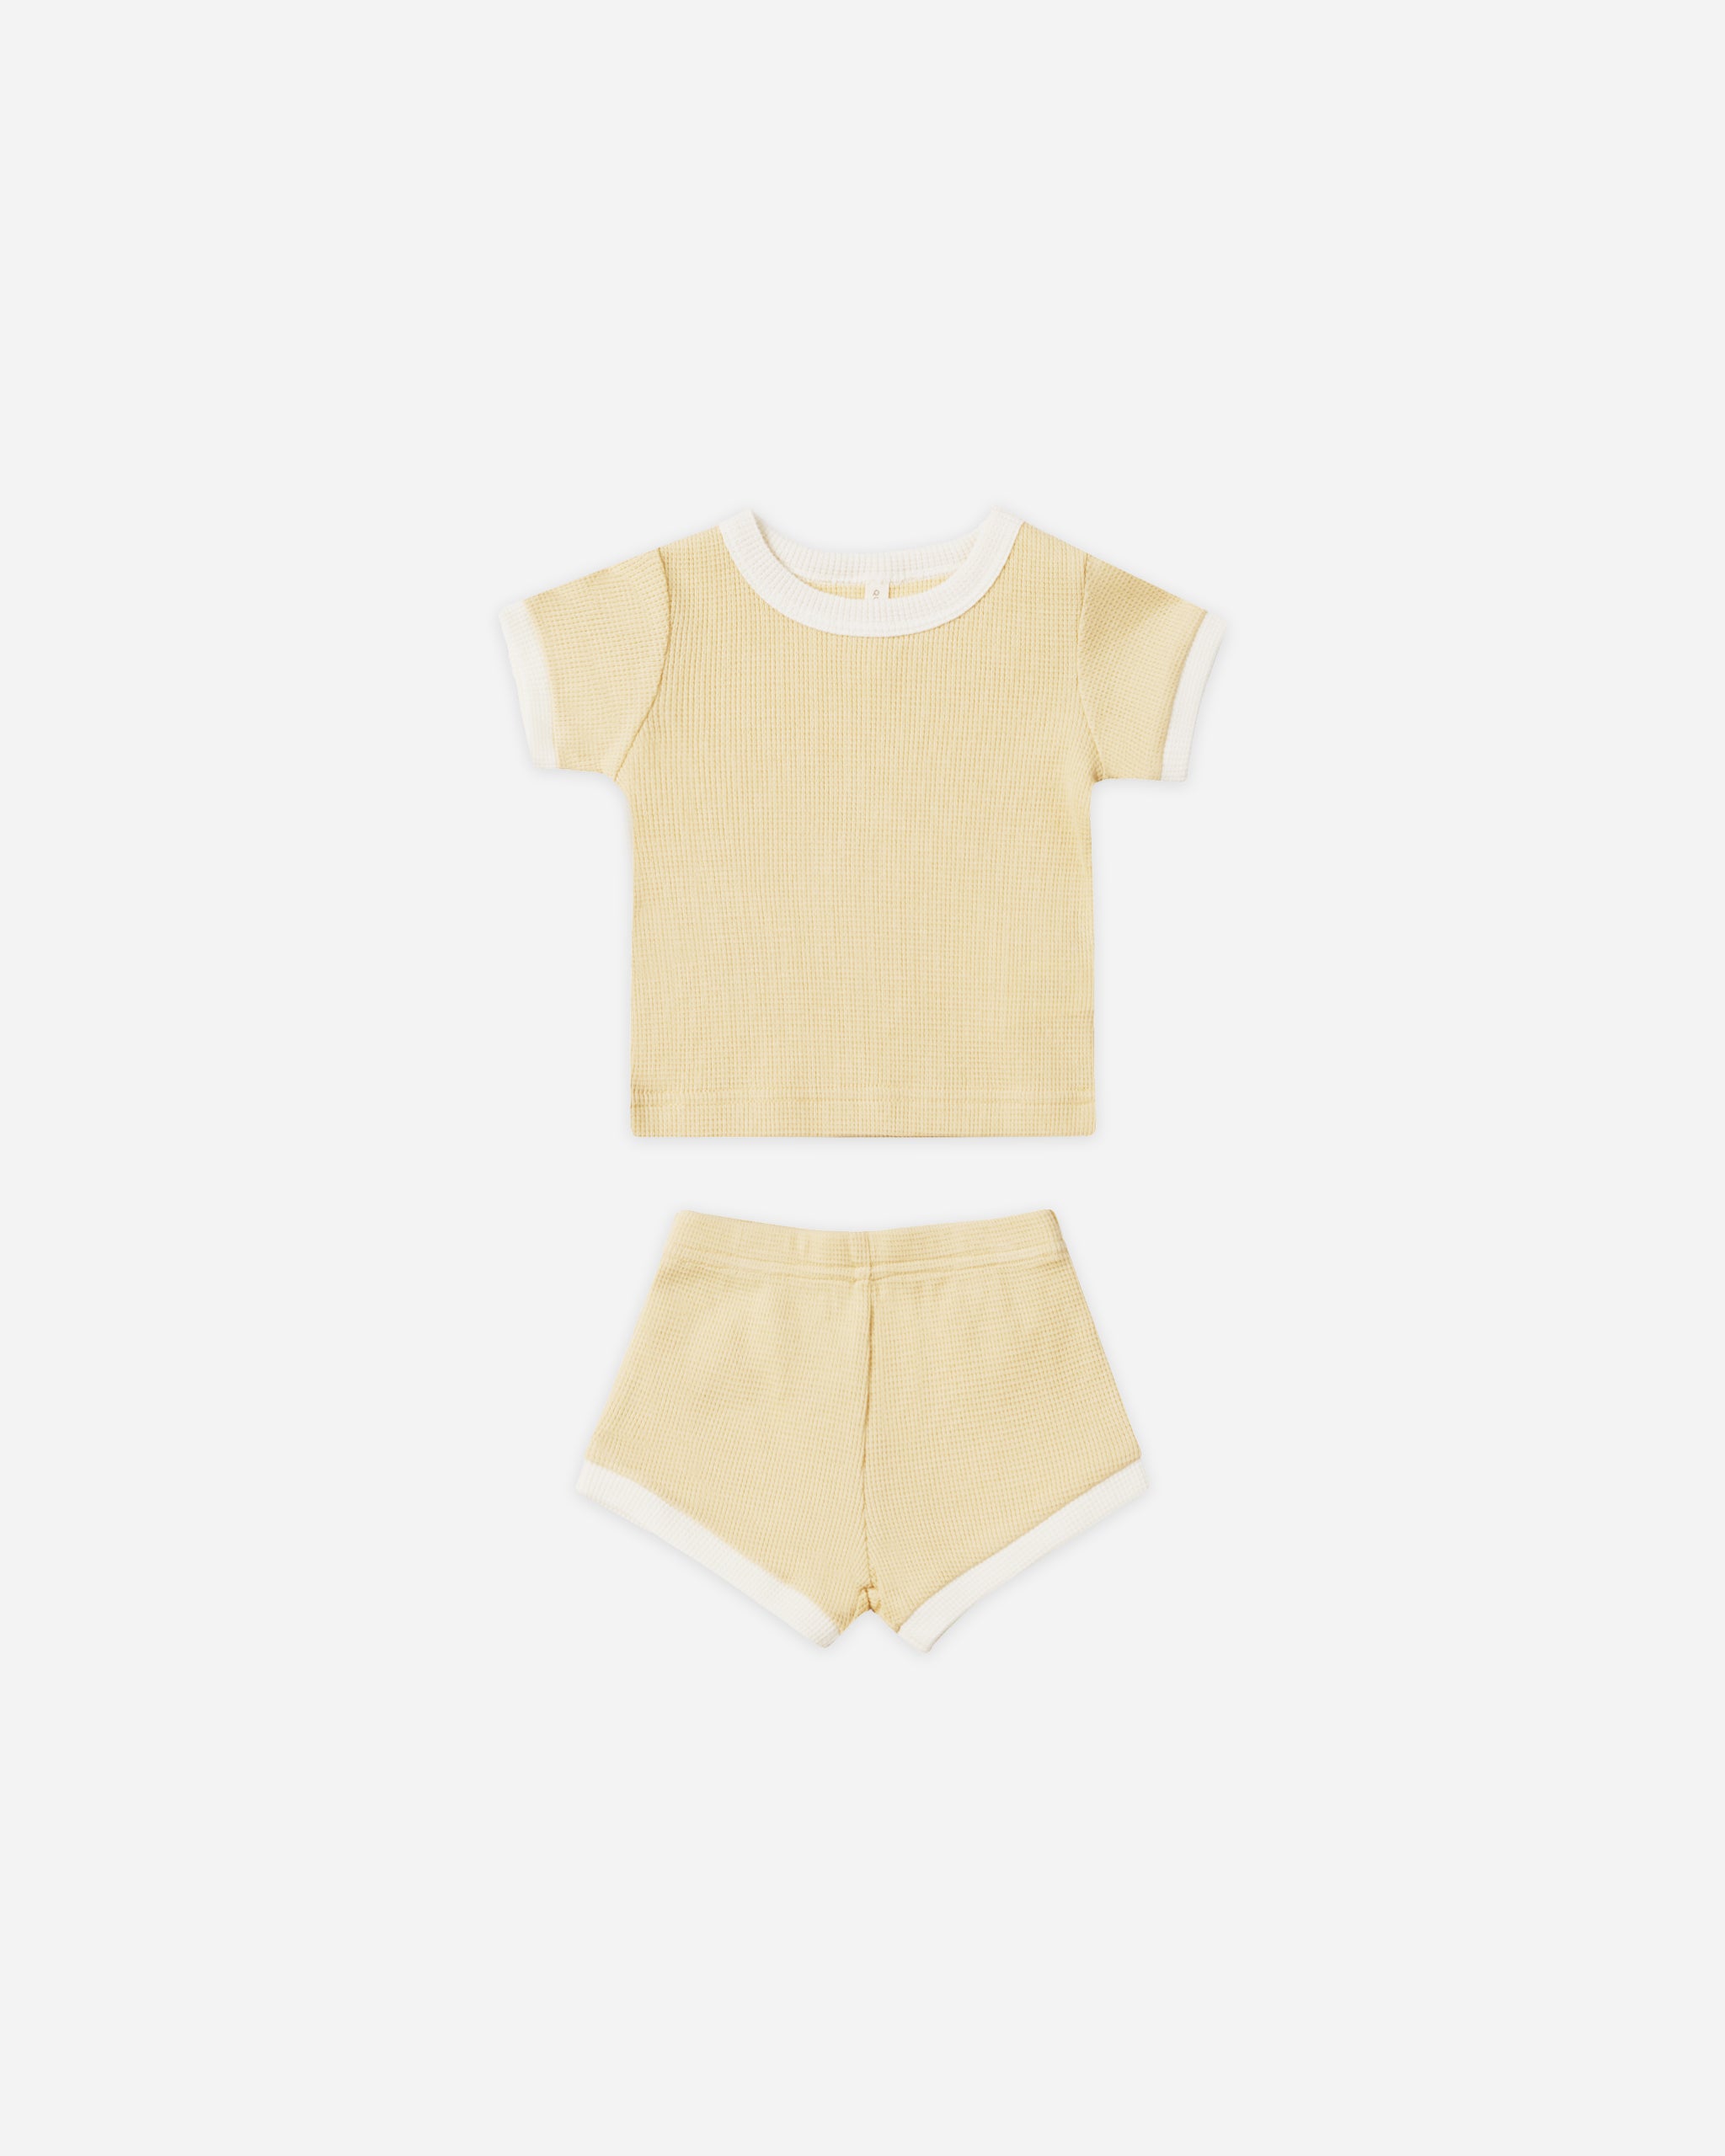 Waffle Shortie Set || Lemon - Rylee + Cru | Kids Clothes | Trendy Baby Clothes | Modern Infant Outfits |